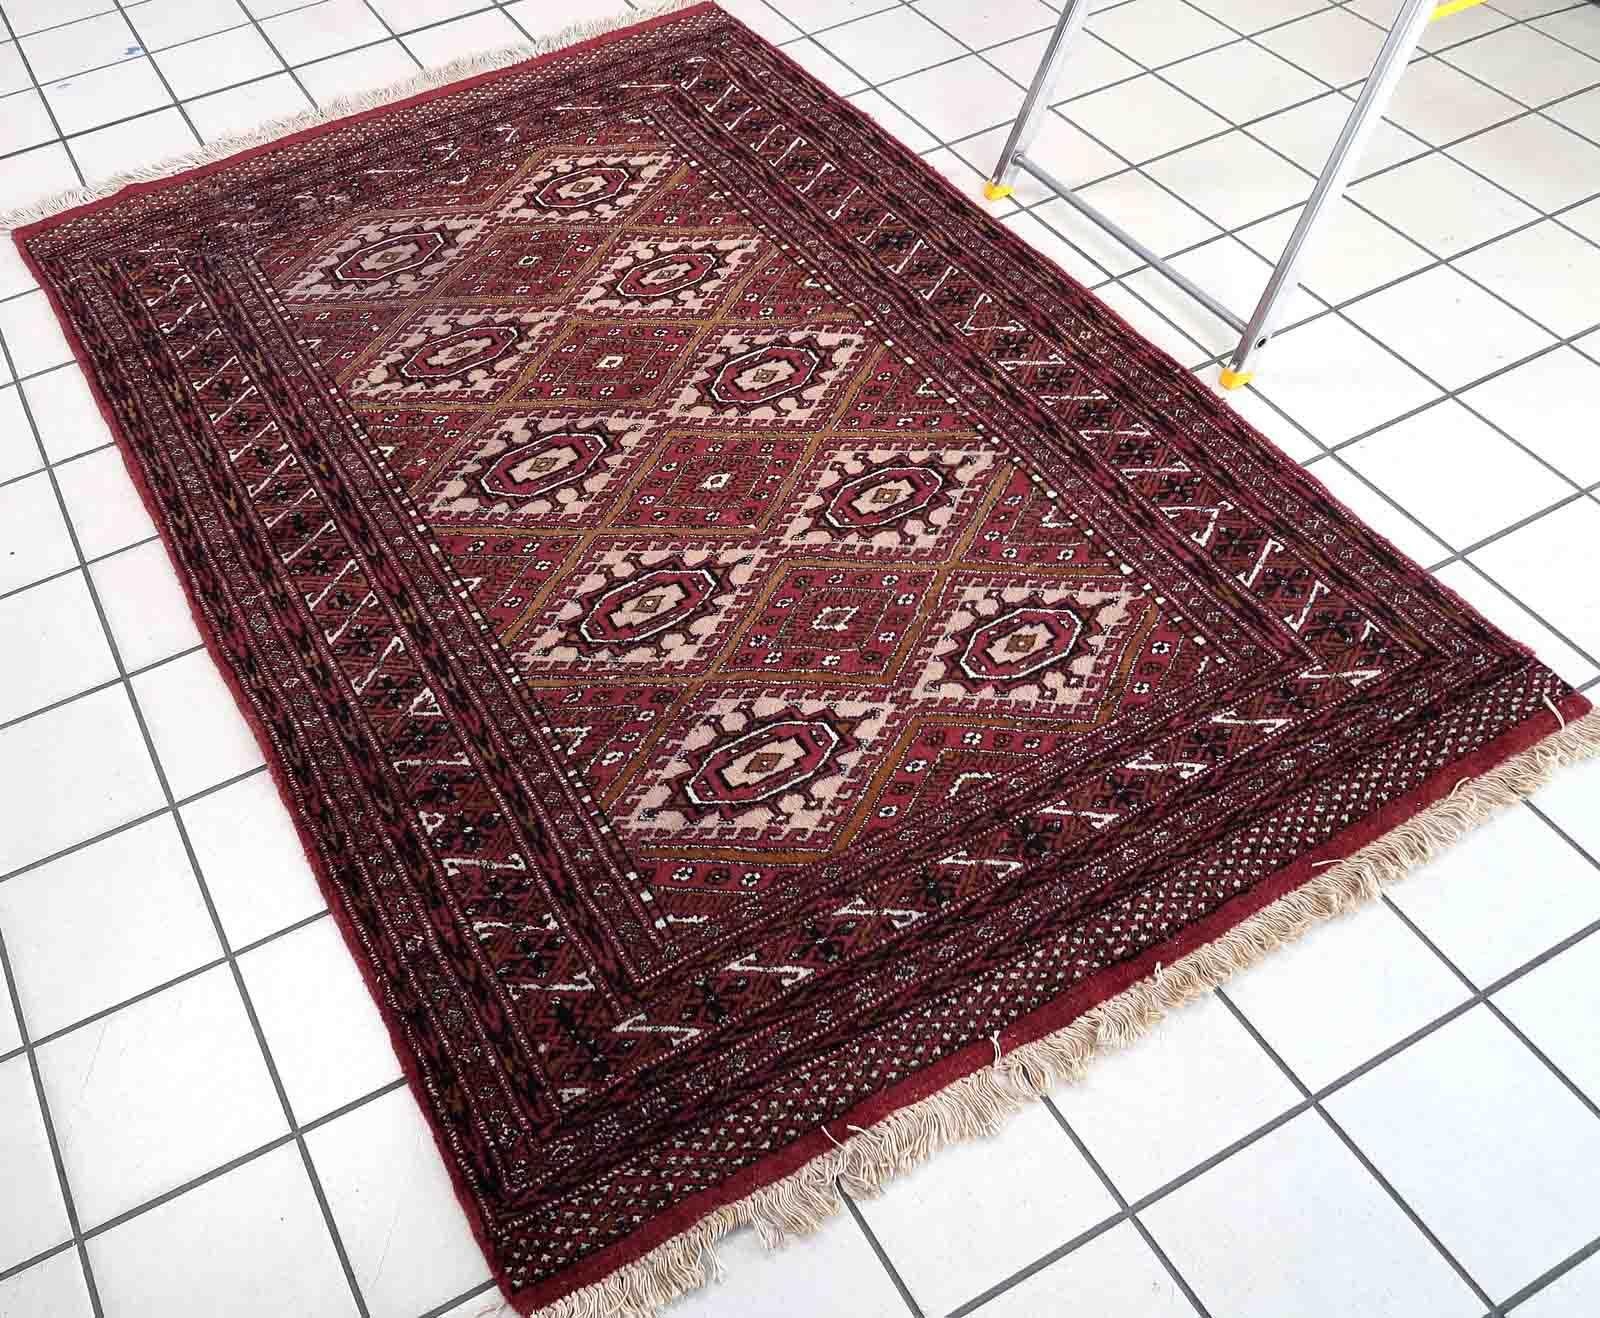 Handmade vintage Afghan Ersari rug in original good condition. The rug has been made in wool in the end of 20th century.

-Condition: original good,

-circa: 1970s,

-Size: 4' x 6' (123cm x 183cm),

-Material: wool,

-Country of origin: